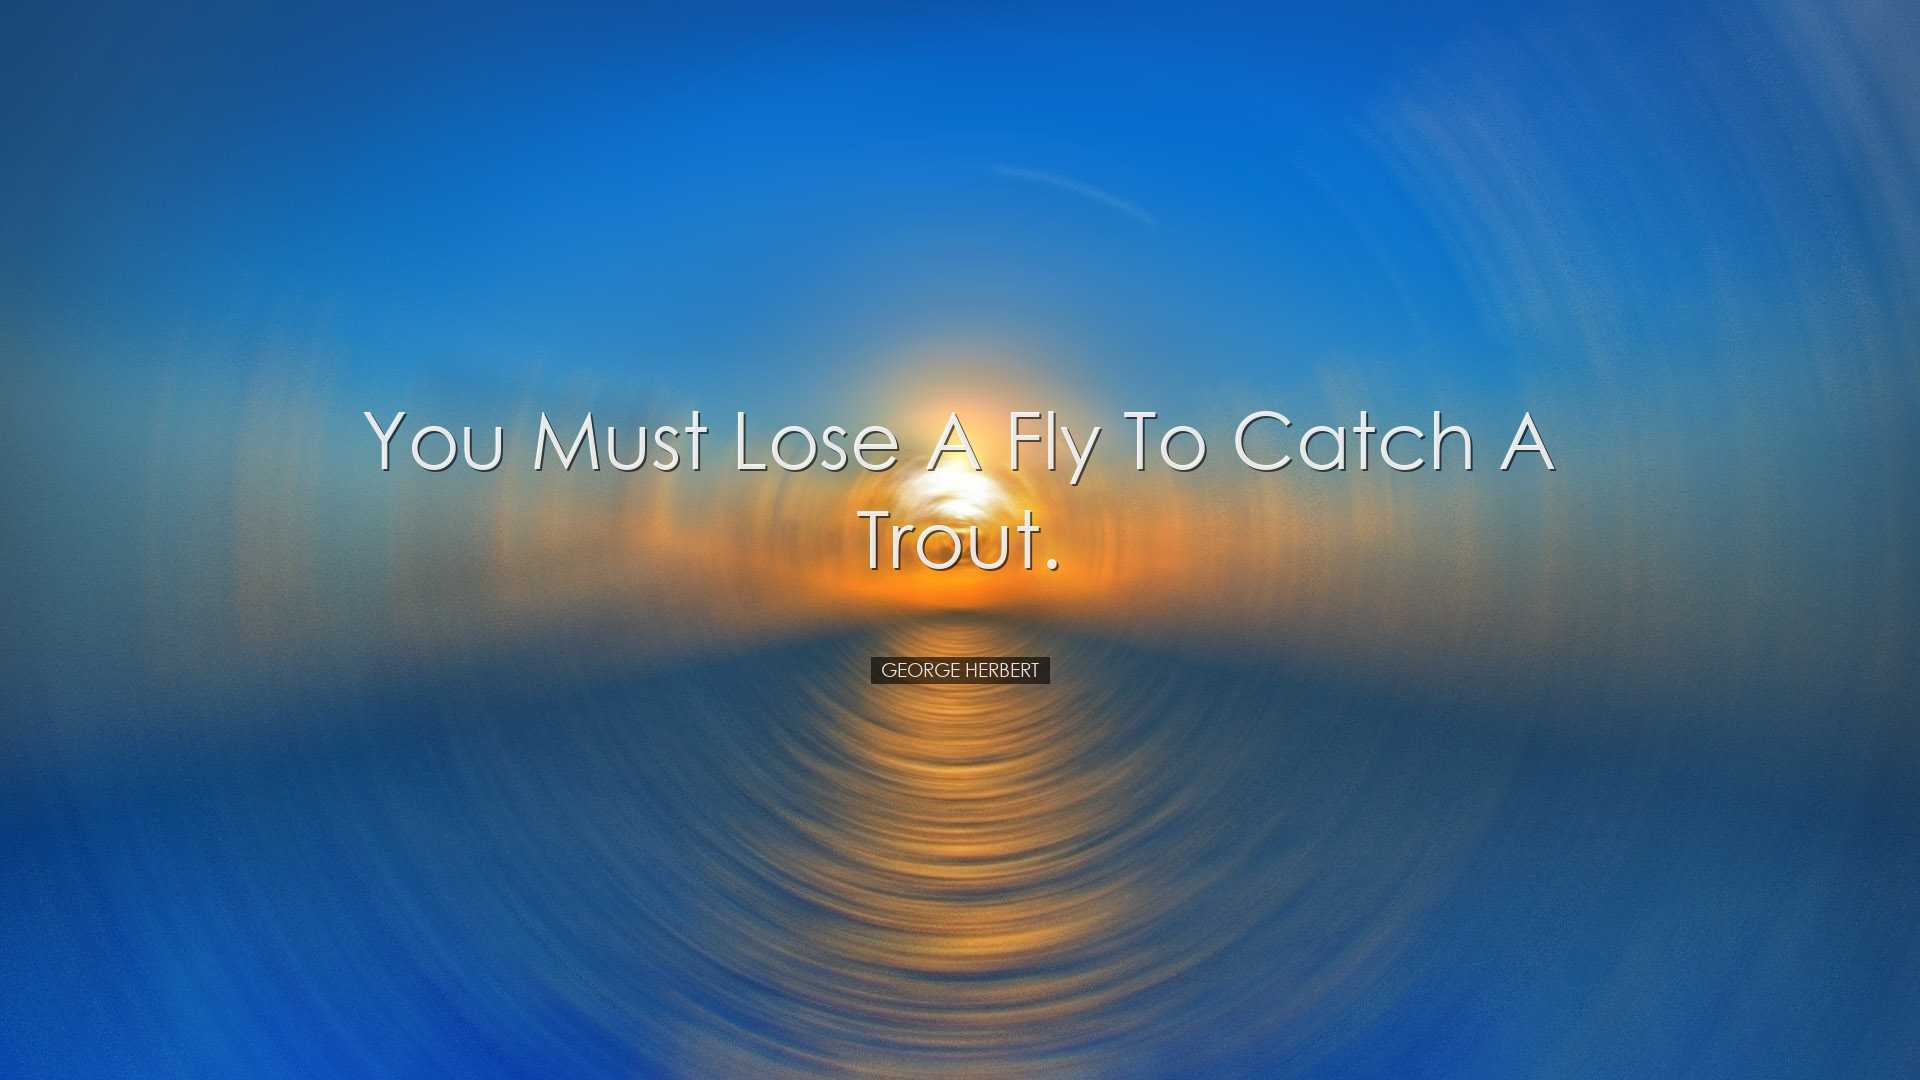 You must lose a fly to catch a trout. - George Herbert